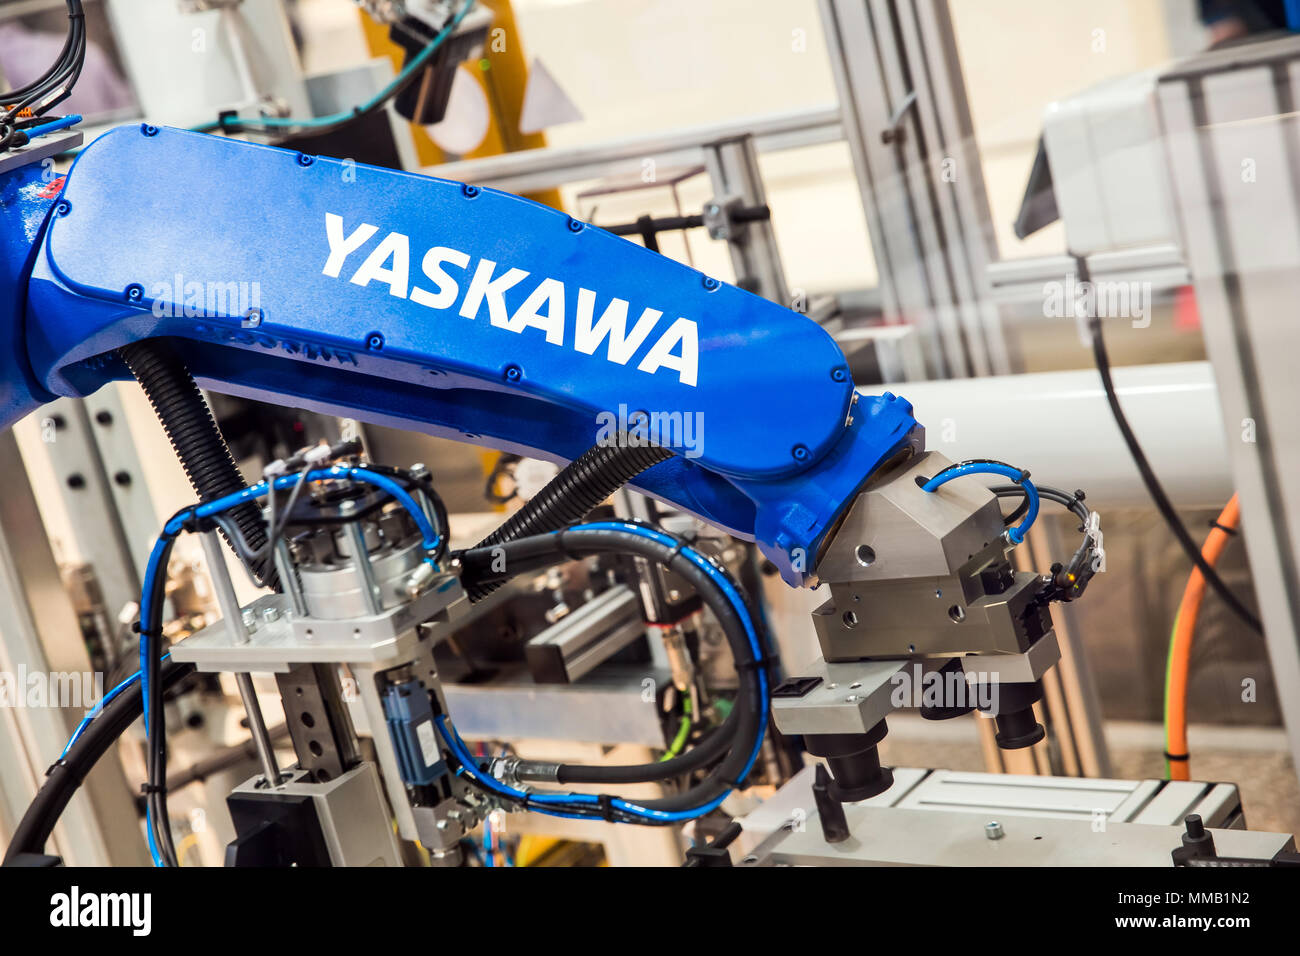 Hannover, Germany - April, 2018: Yaskawa robot arm on Messe fair in Hannover, Germany Stock Photo